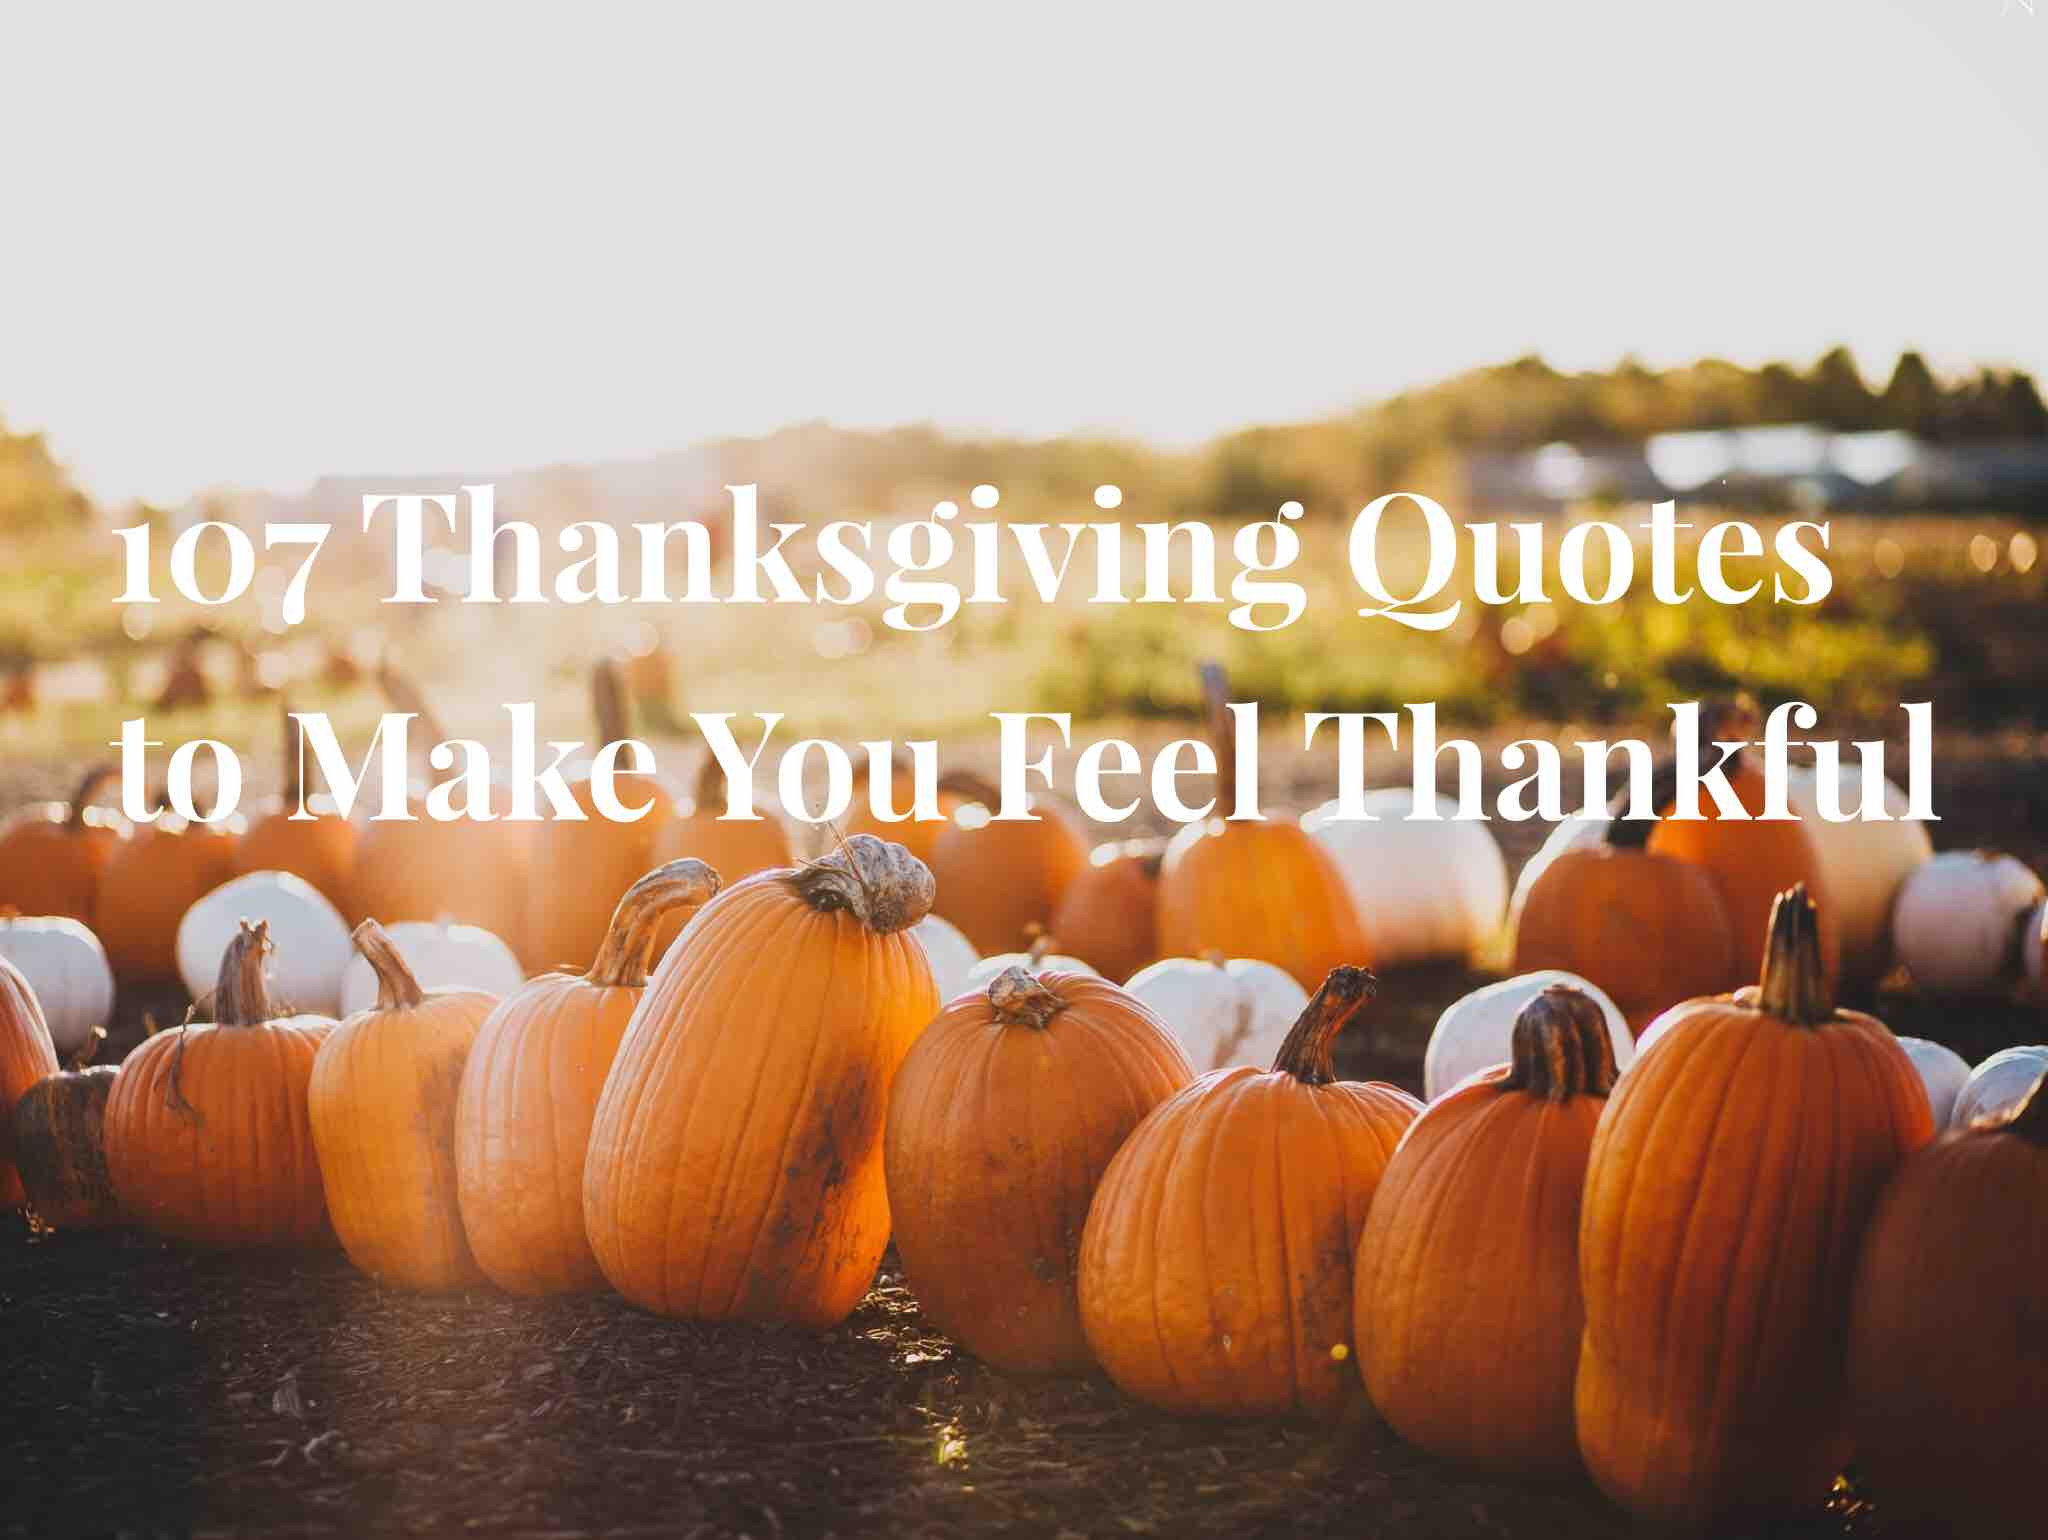 Thanksgiving Quotes Baby
 107 Thanksgiving Quotes to Make You Feel Thankful